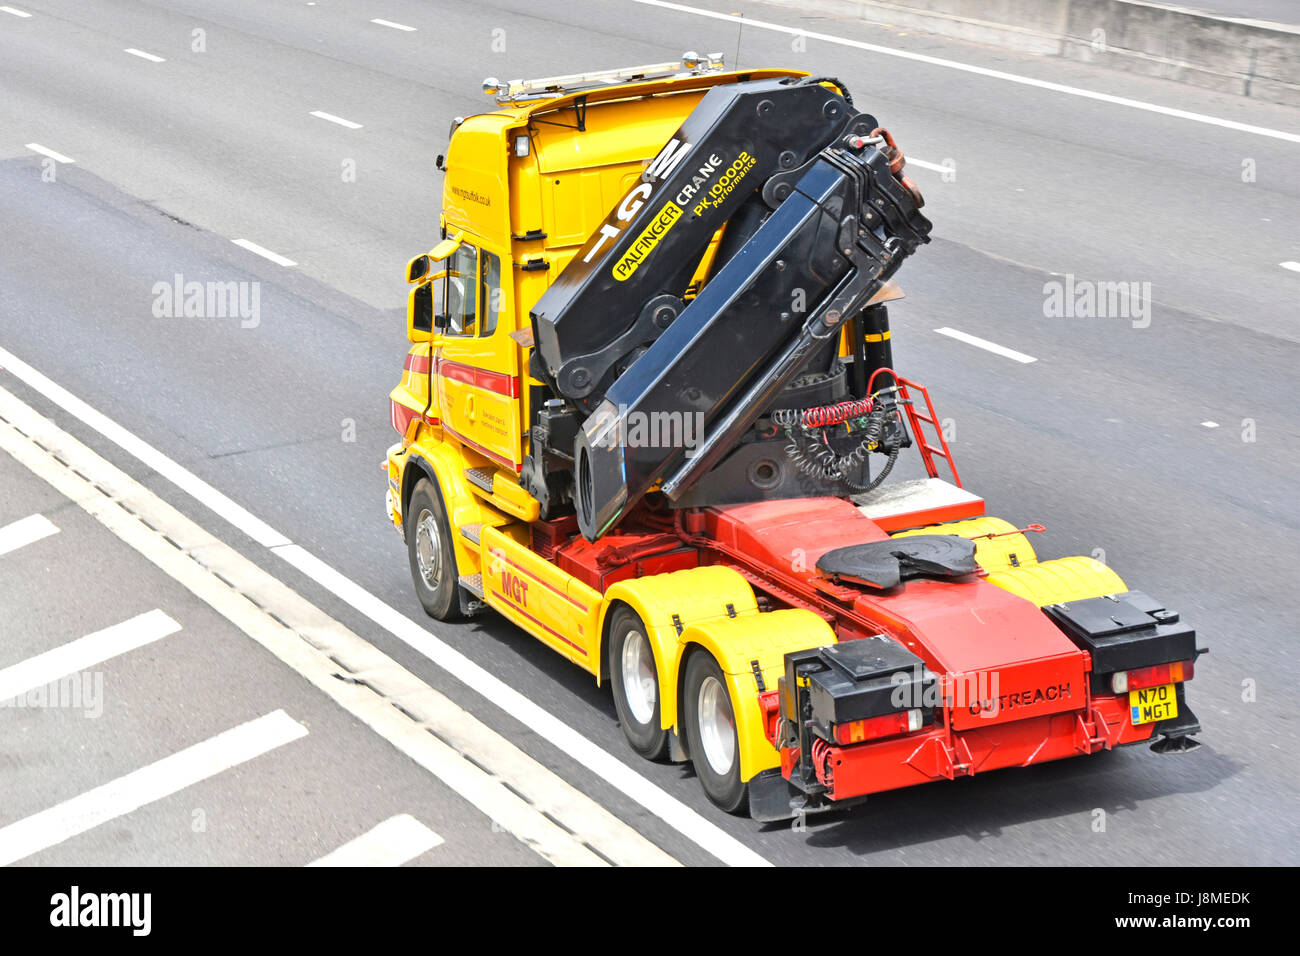 Articulated hgv logistics truck uk lorry without trailer driving on Essex English UK m25 motorway with Outreach Palefinger PK 100002 crane behind cab Stock Photo